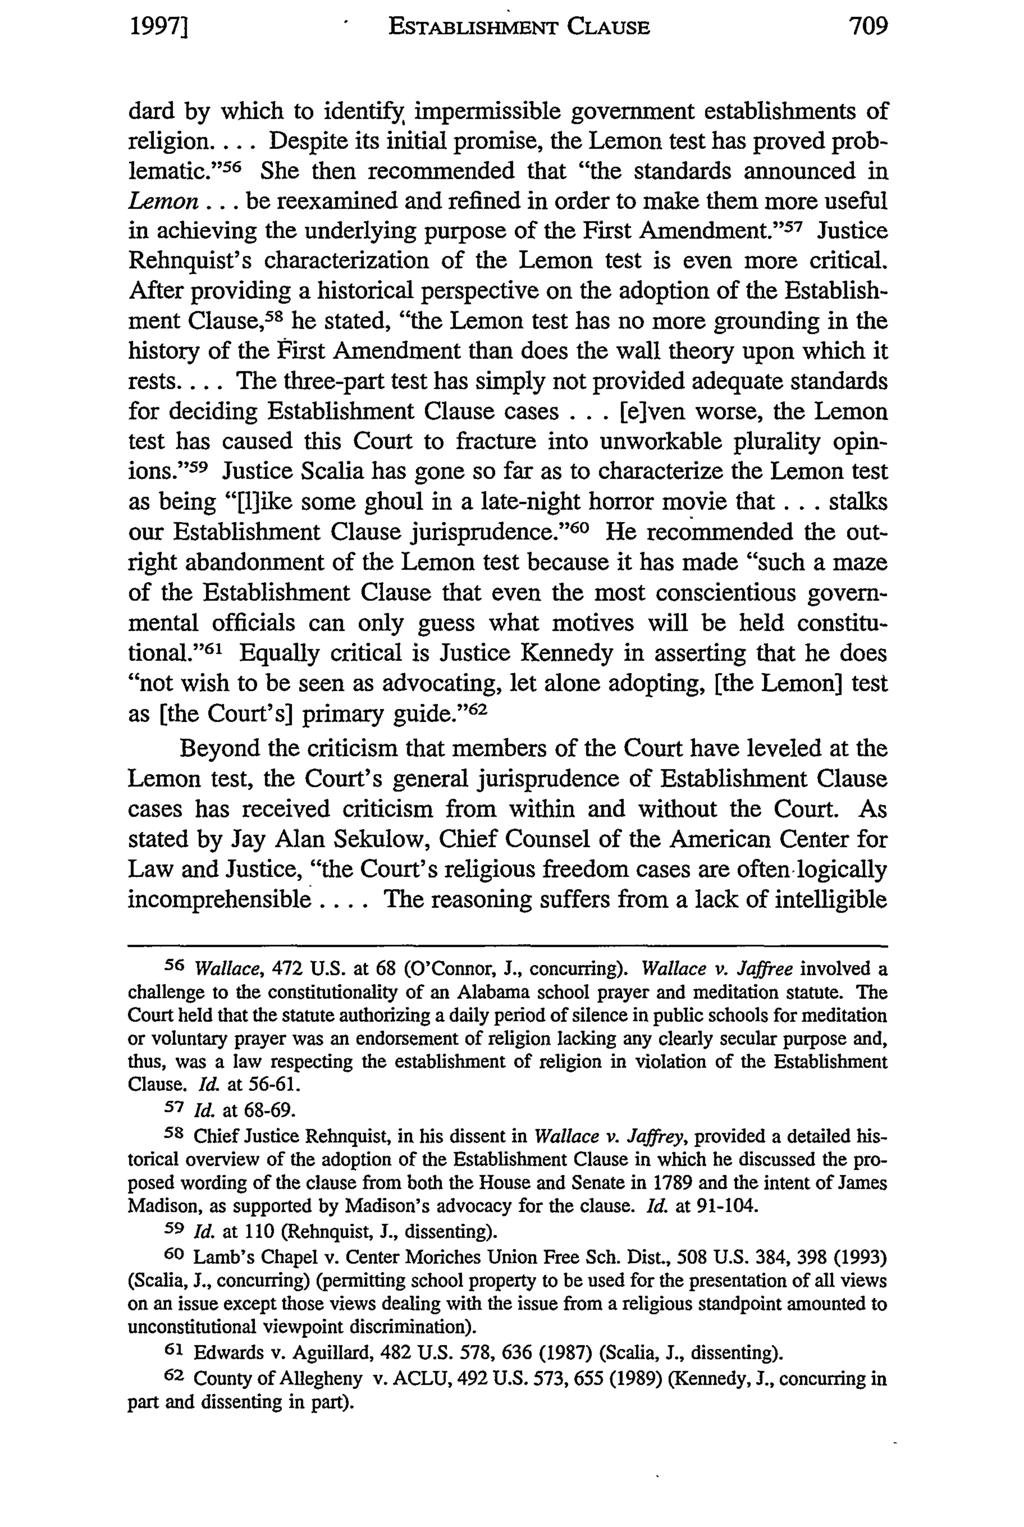 19971 ESTABLISHMENT CLAUSE dard by which to identify impermissible government establishments of religion... Despite its initial promise, the Lemon test has proved problematic.